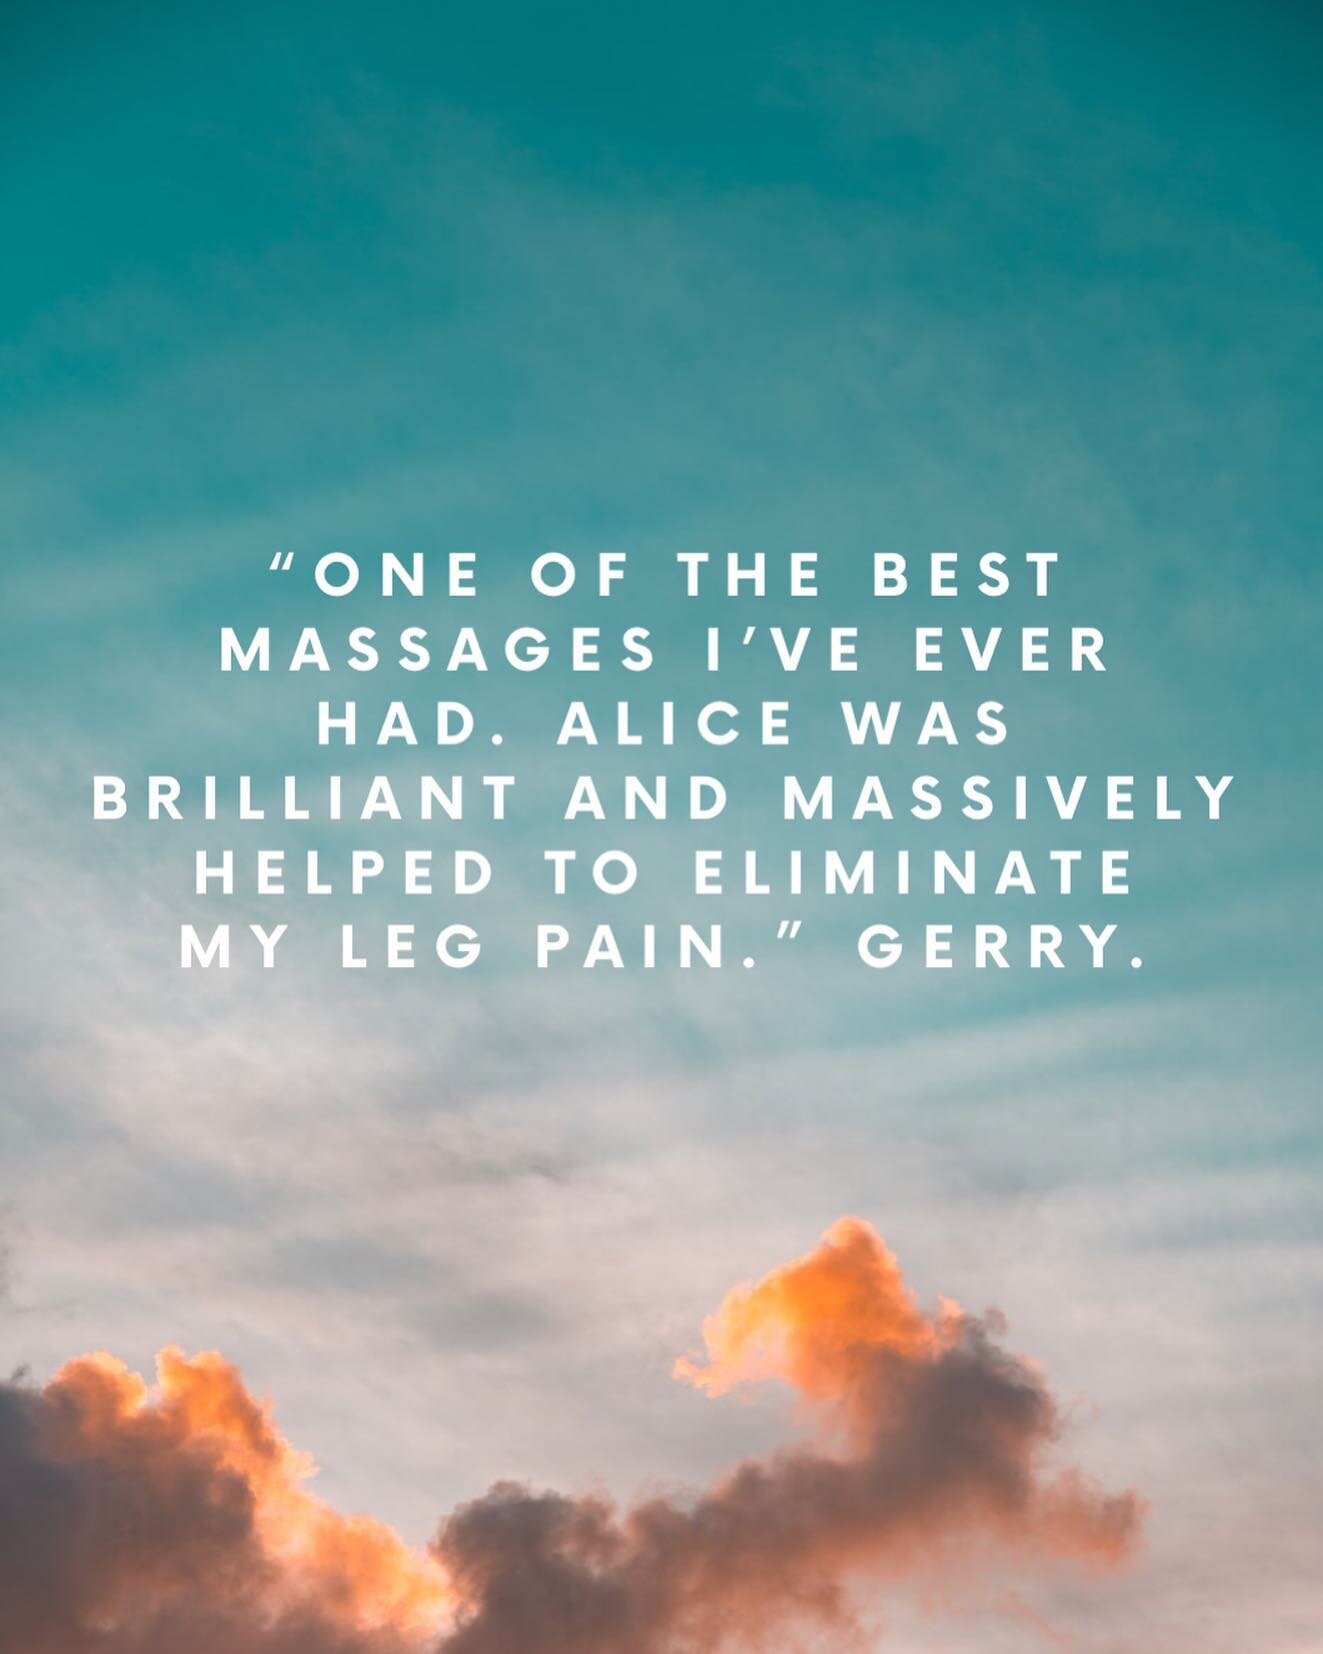 Massage to eliminate pain ✅
Gerry booked a 90 minute session with me which was great, as it meant that I could spend enough time on the area he was experiencing pain (as well as the root of the problem- sometimes it&rsquo;s referred pain), but also e